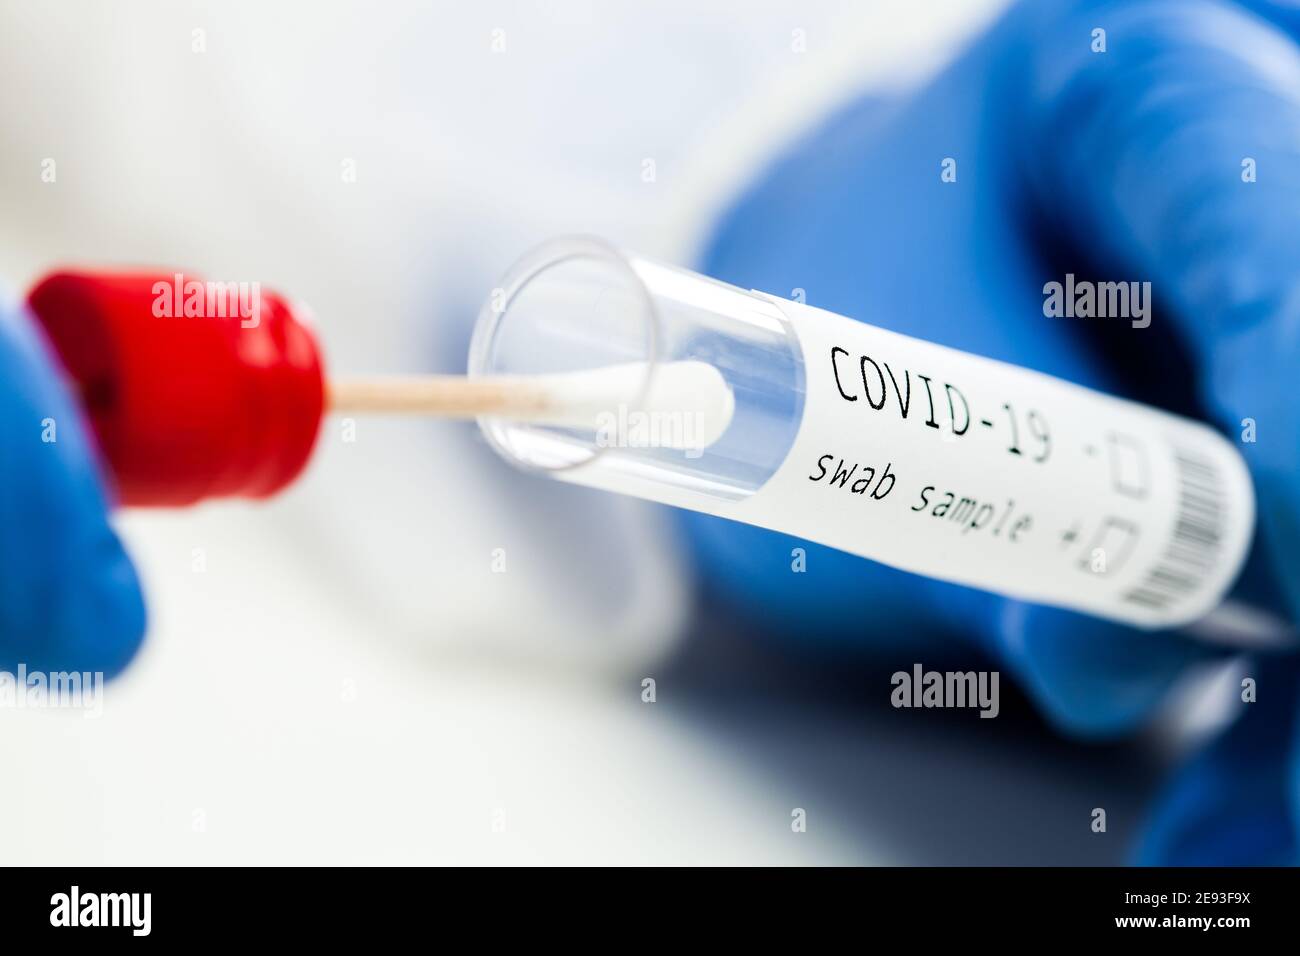 rt-PCR COVID-19 virus disease diagnostic test,UK lab technician wearing blue protective glove holding test tube with swabbing stick,DNA nasal and oral Stock Photo